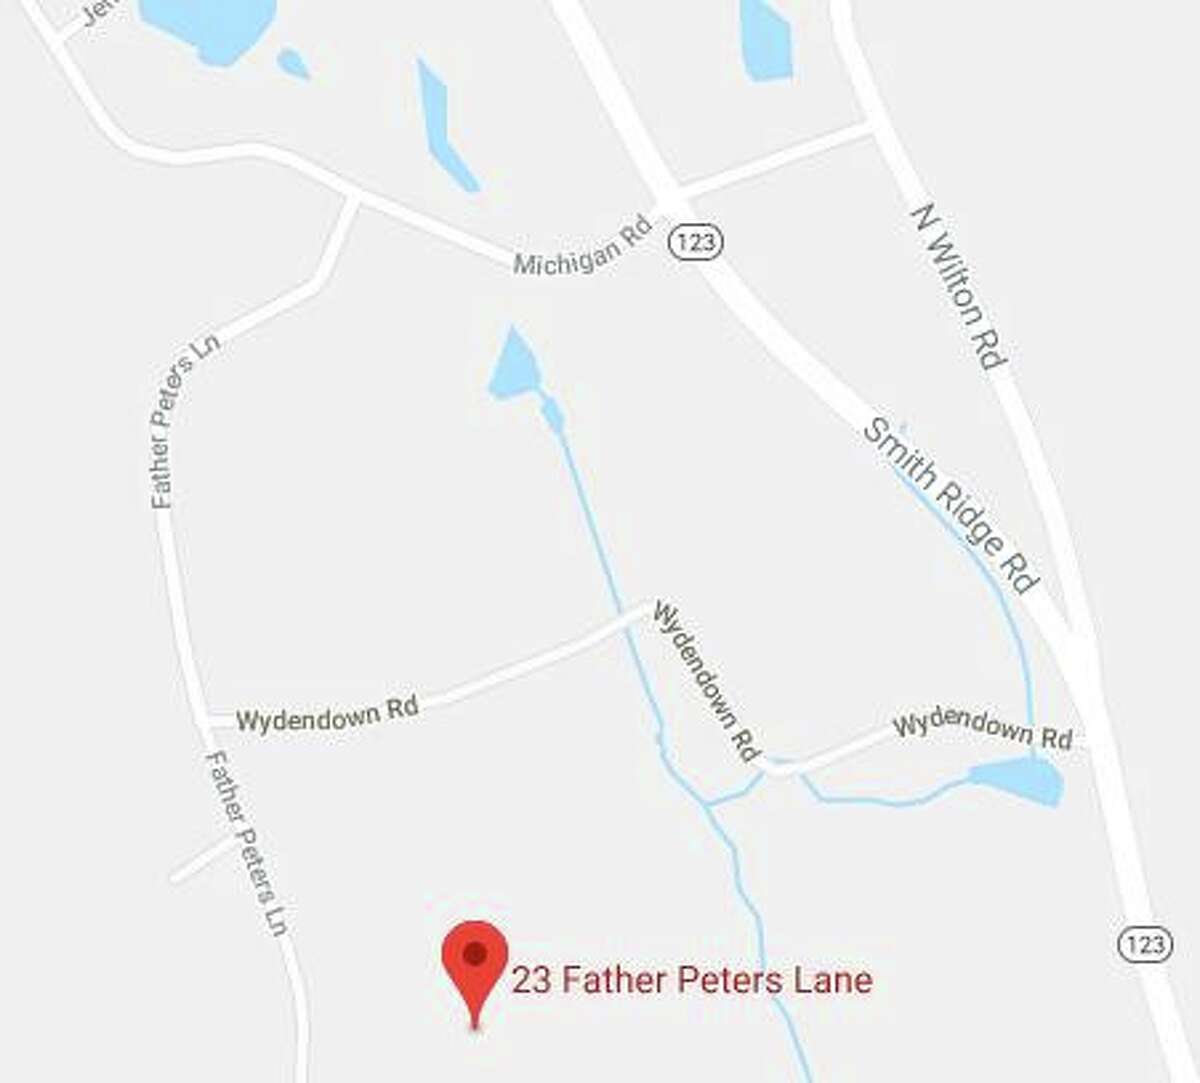 Fire struck a roof on Father Peters Lane in New Canaan, which is west of Route 123 and south of Michigan Road, around 4:30 p.m. Friday, Sept. 20.